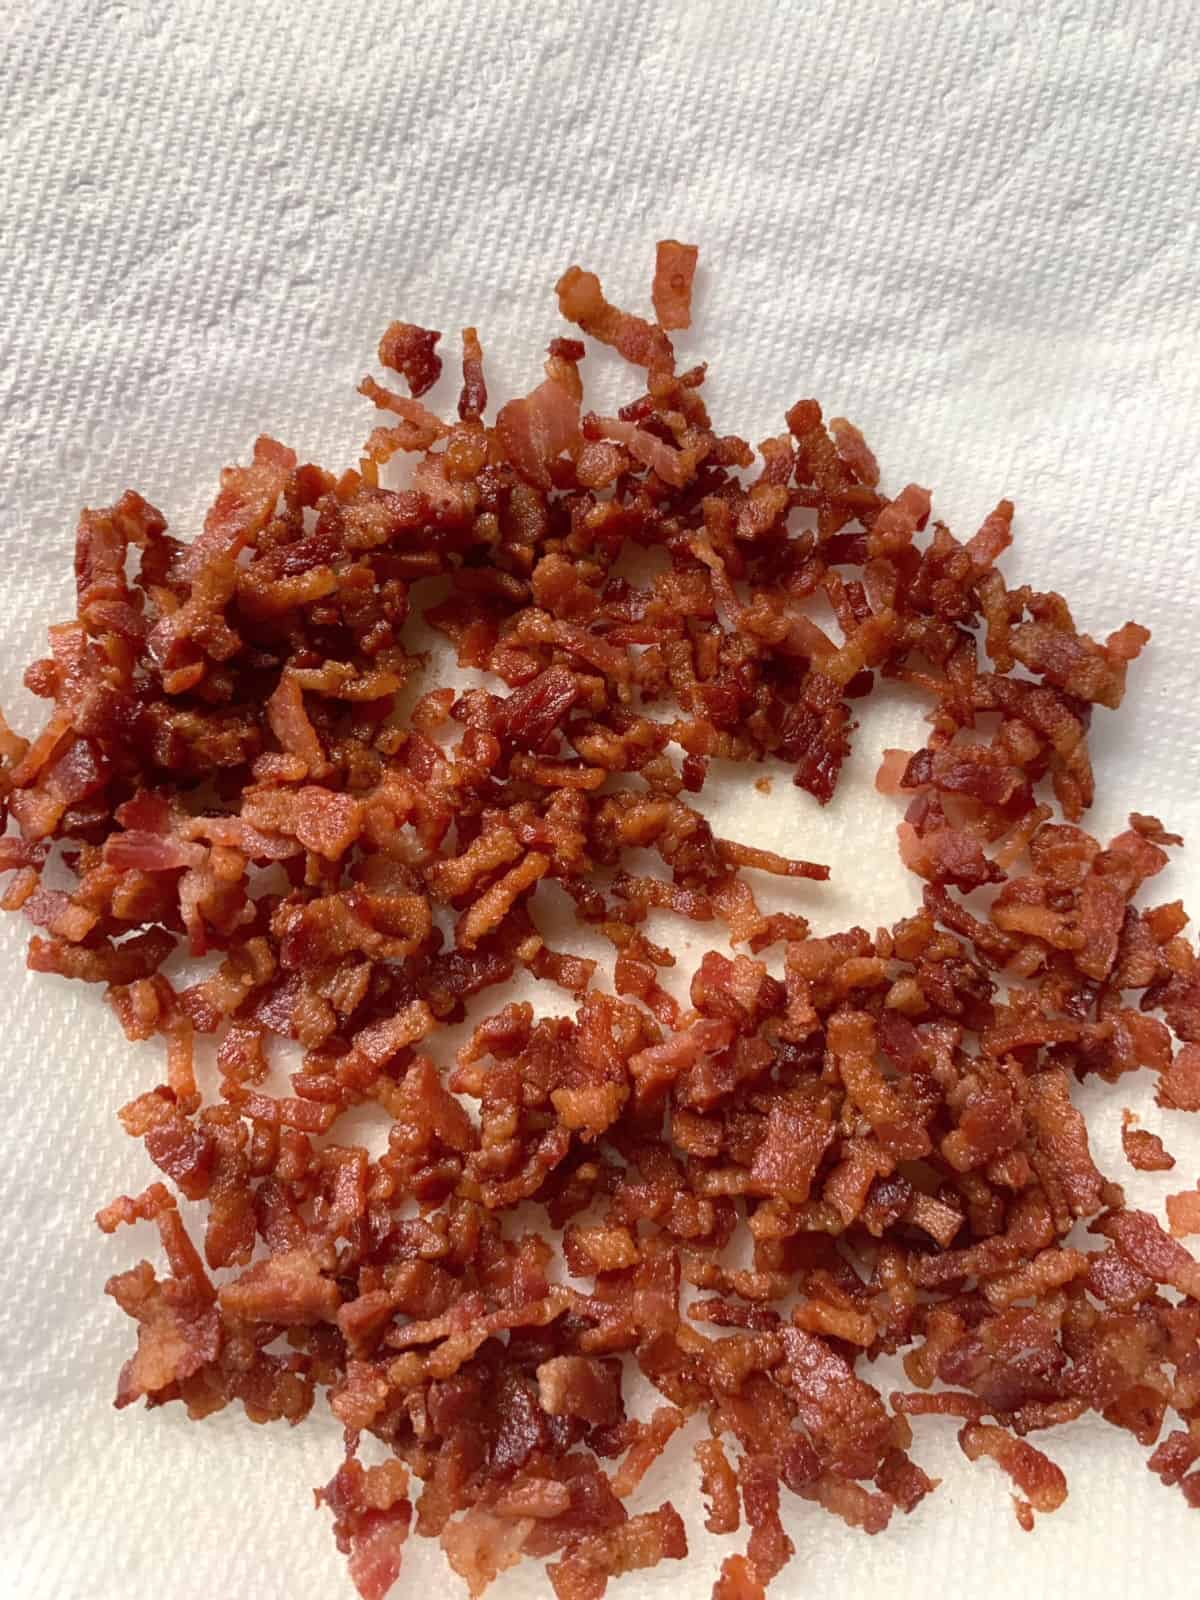 Cooked chopped bacon on a paper towel.